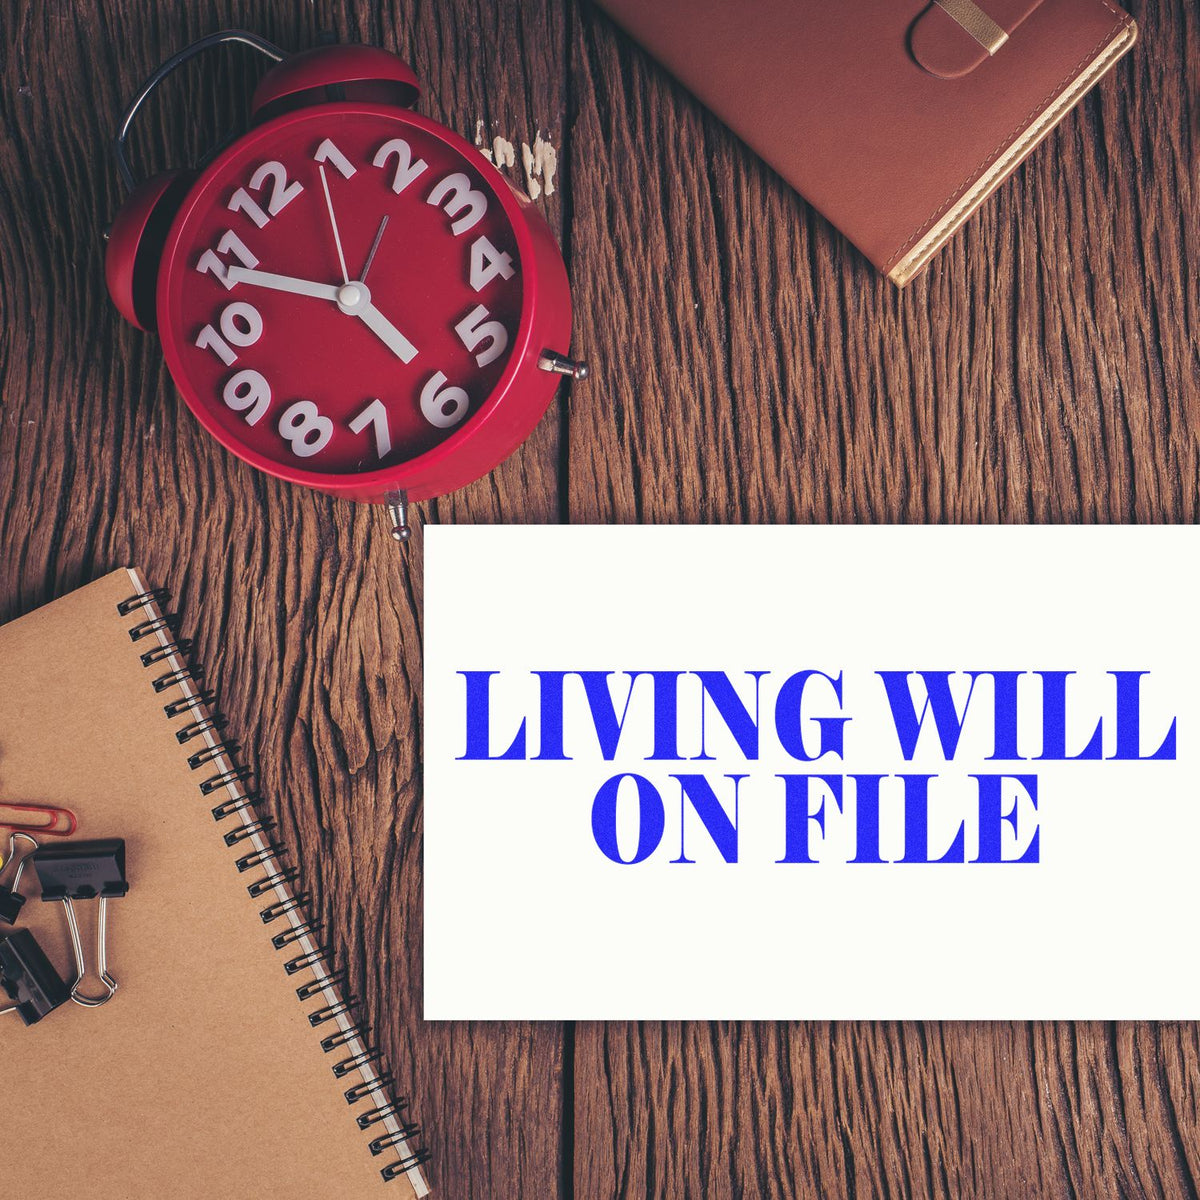 Living Will On File Rubber Stamp In Use Photo